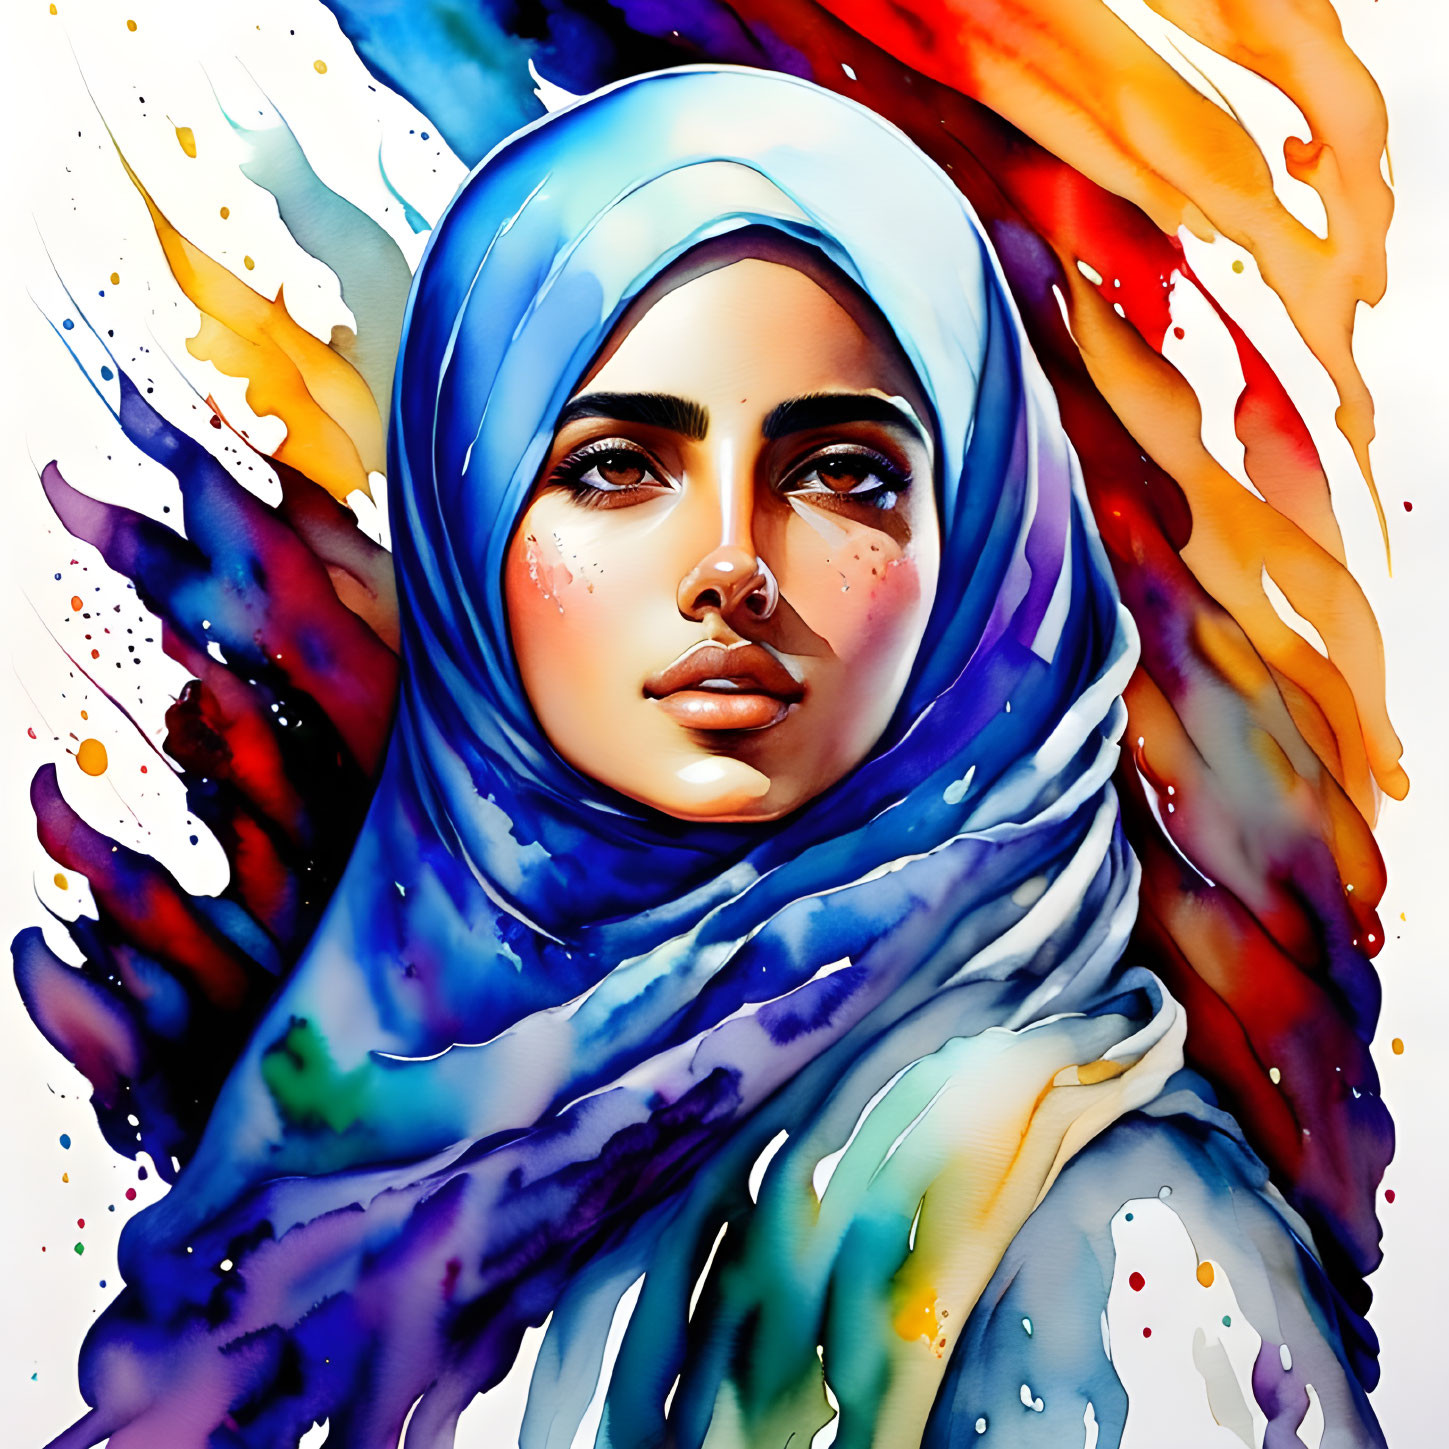 Colorful digital artwork of woman in blue hijab with rainbow background